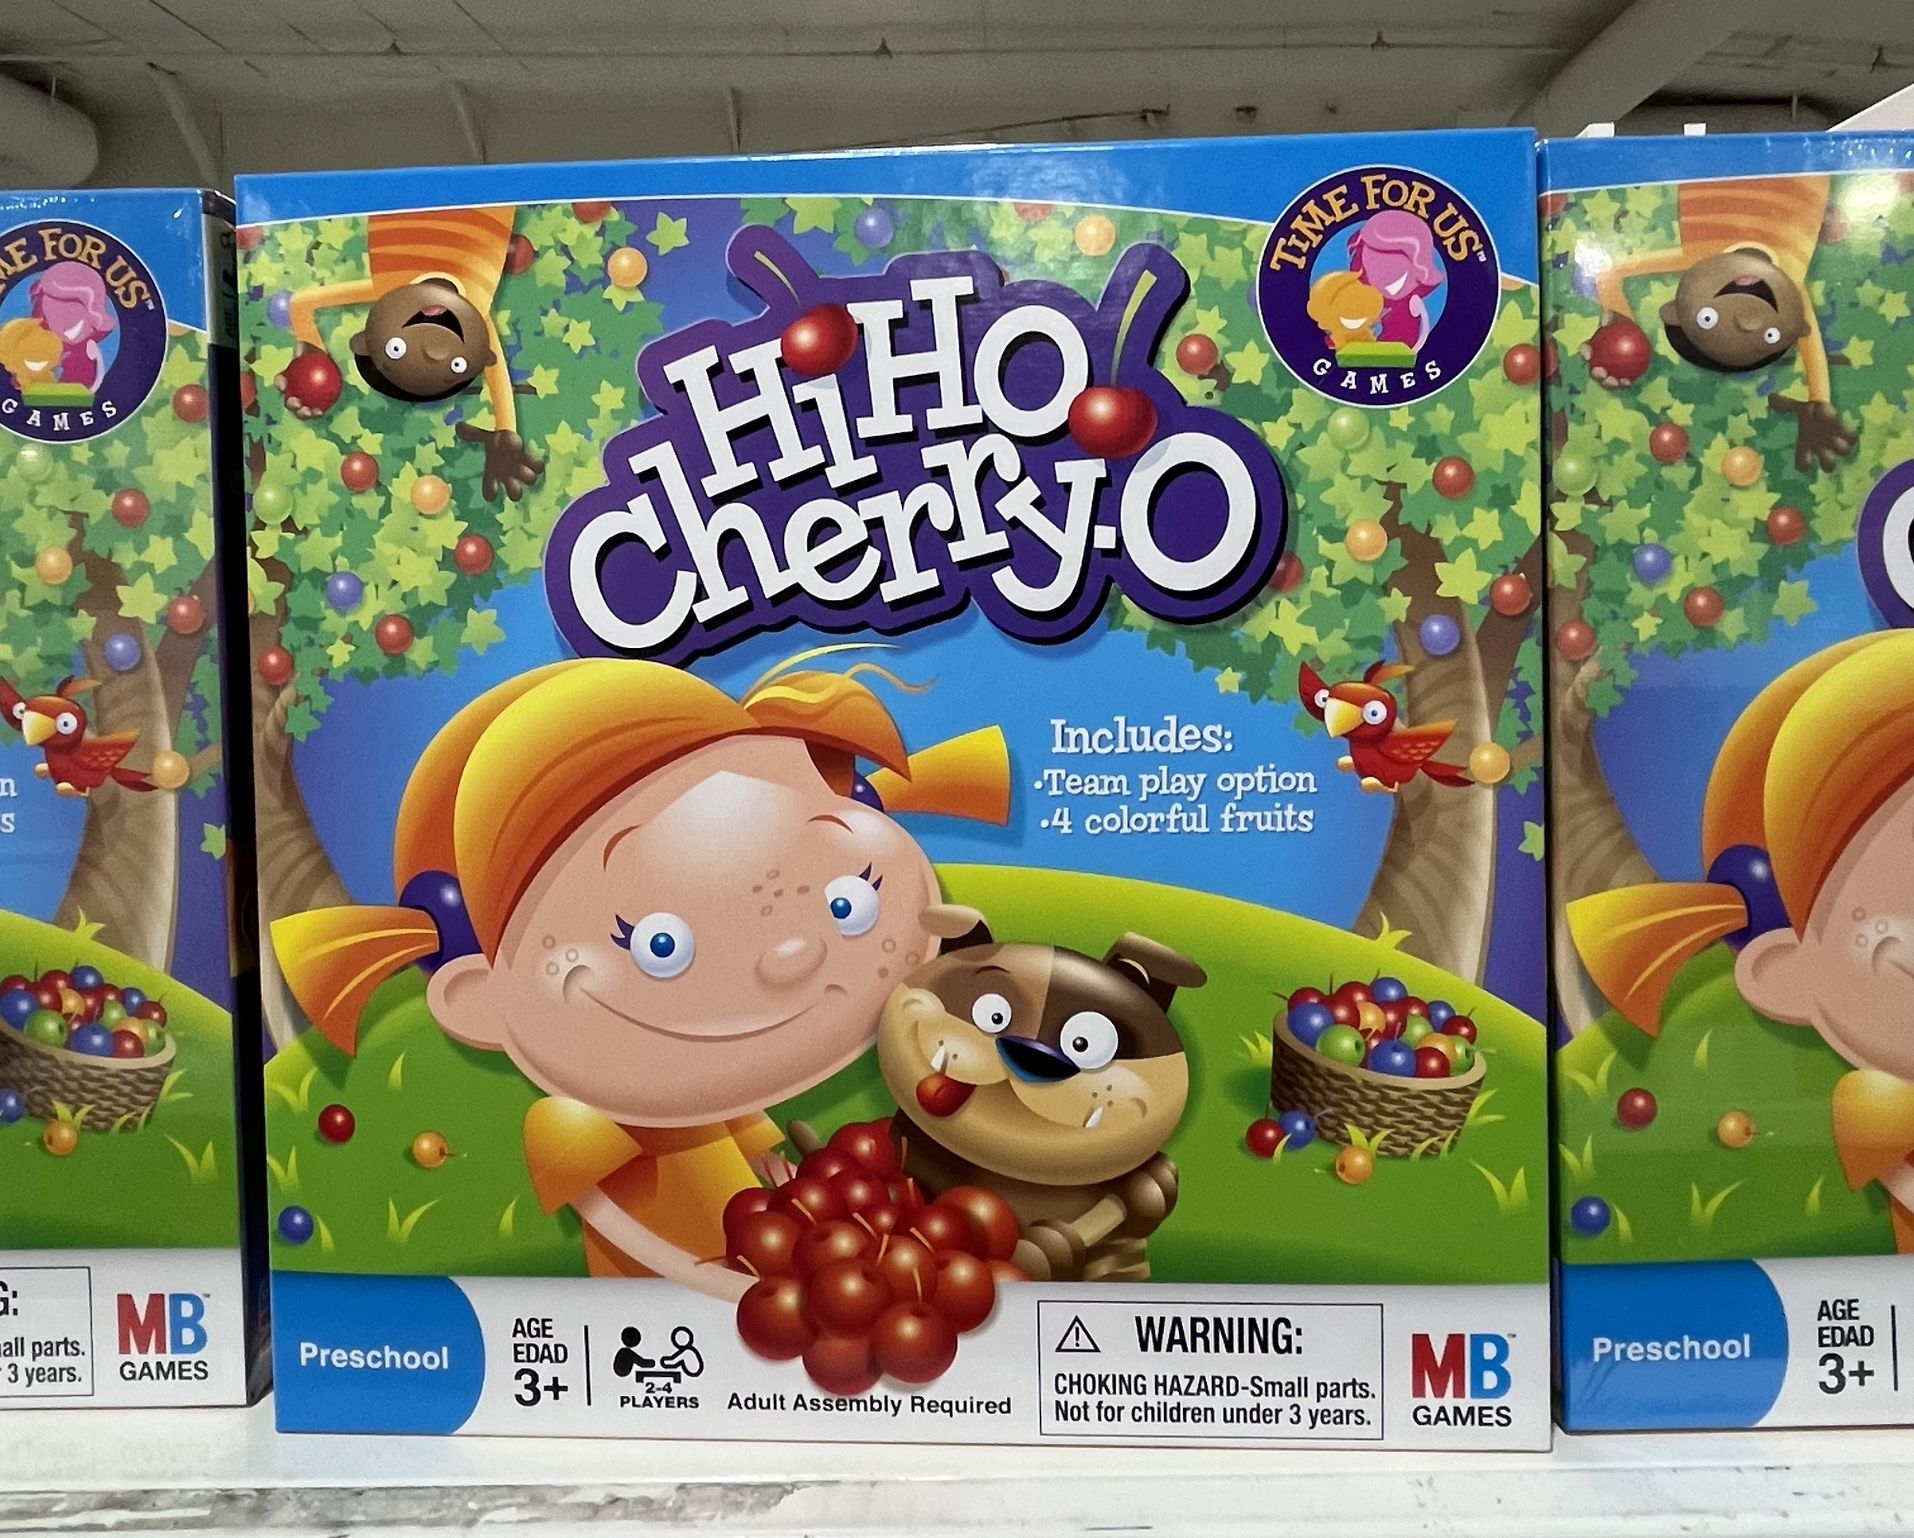 Hasbro Hi Ho! Cherry-O Board Game for 2 to 4 Players Kids Ages 3 and Up $4.99